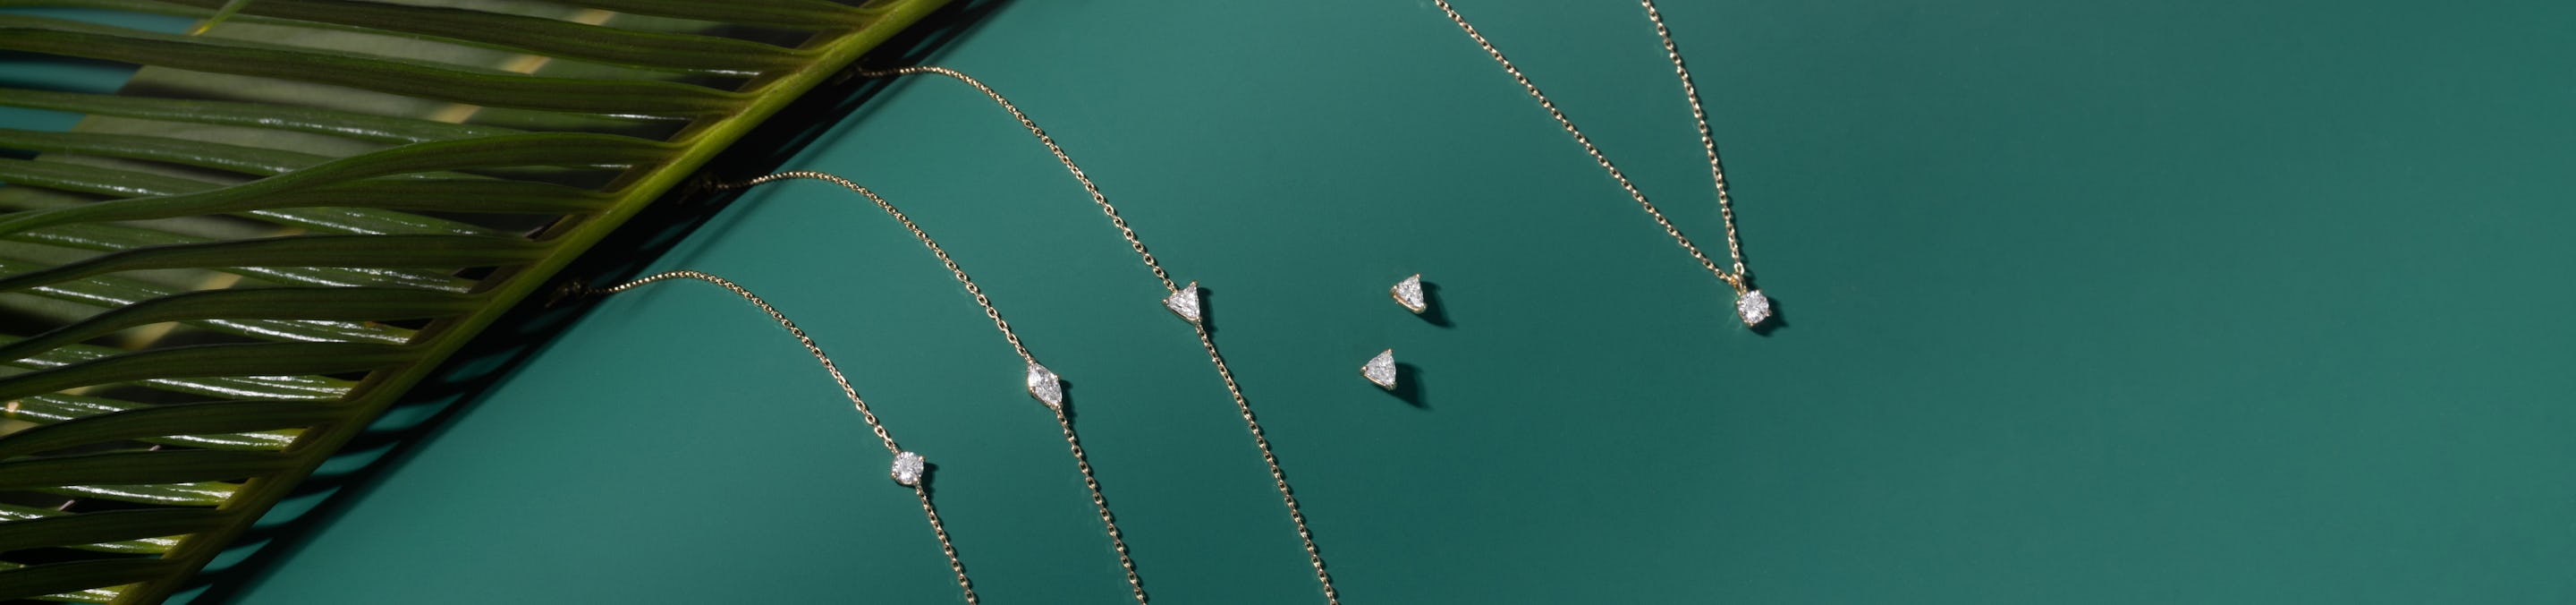 lab grown diamond necklaces and earrings in timeless designs